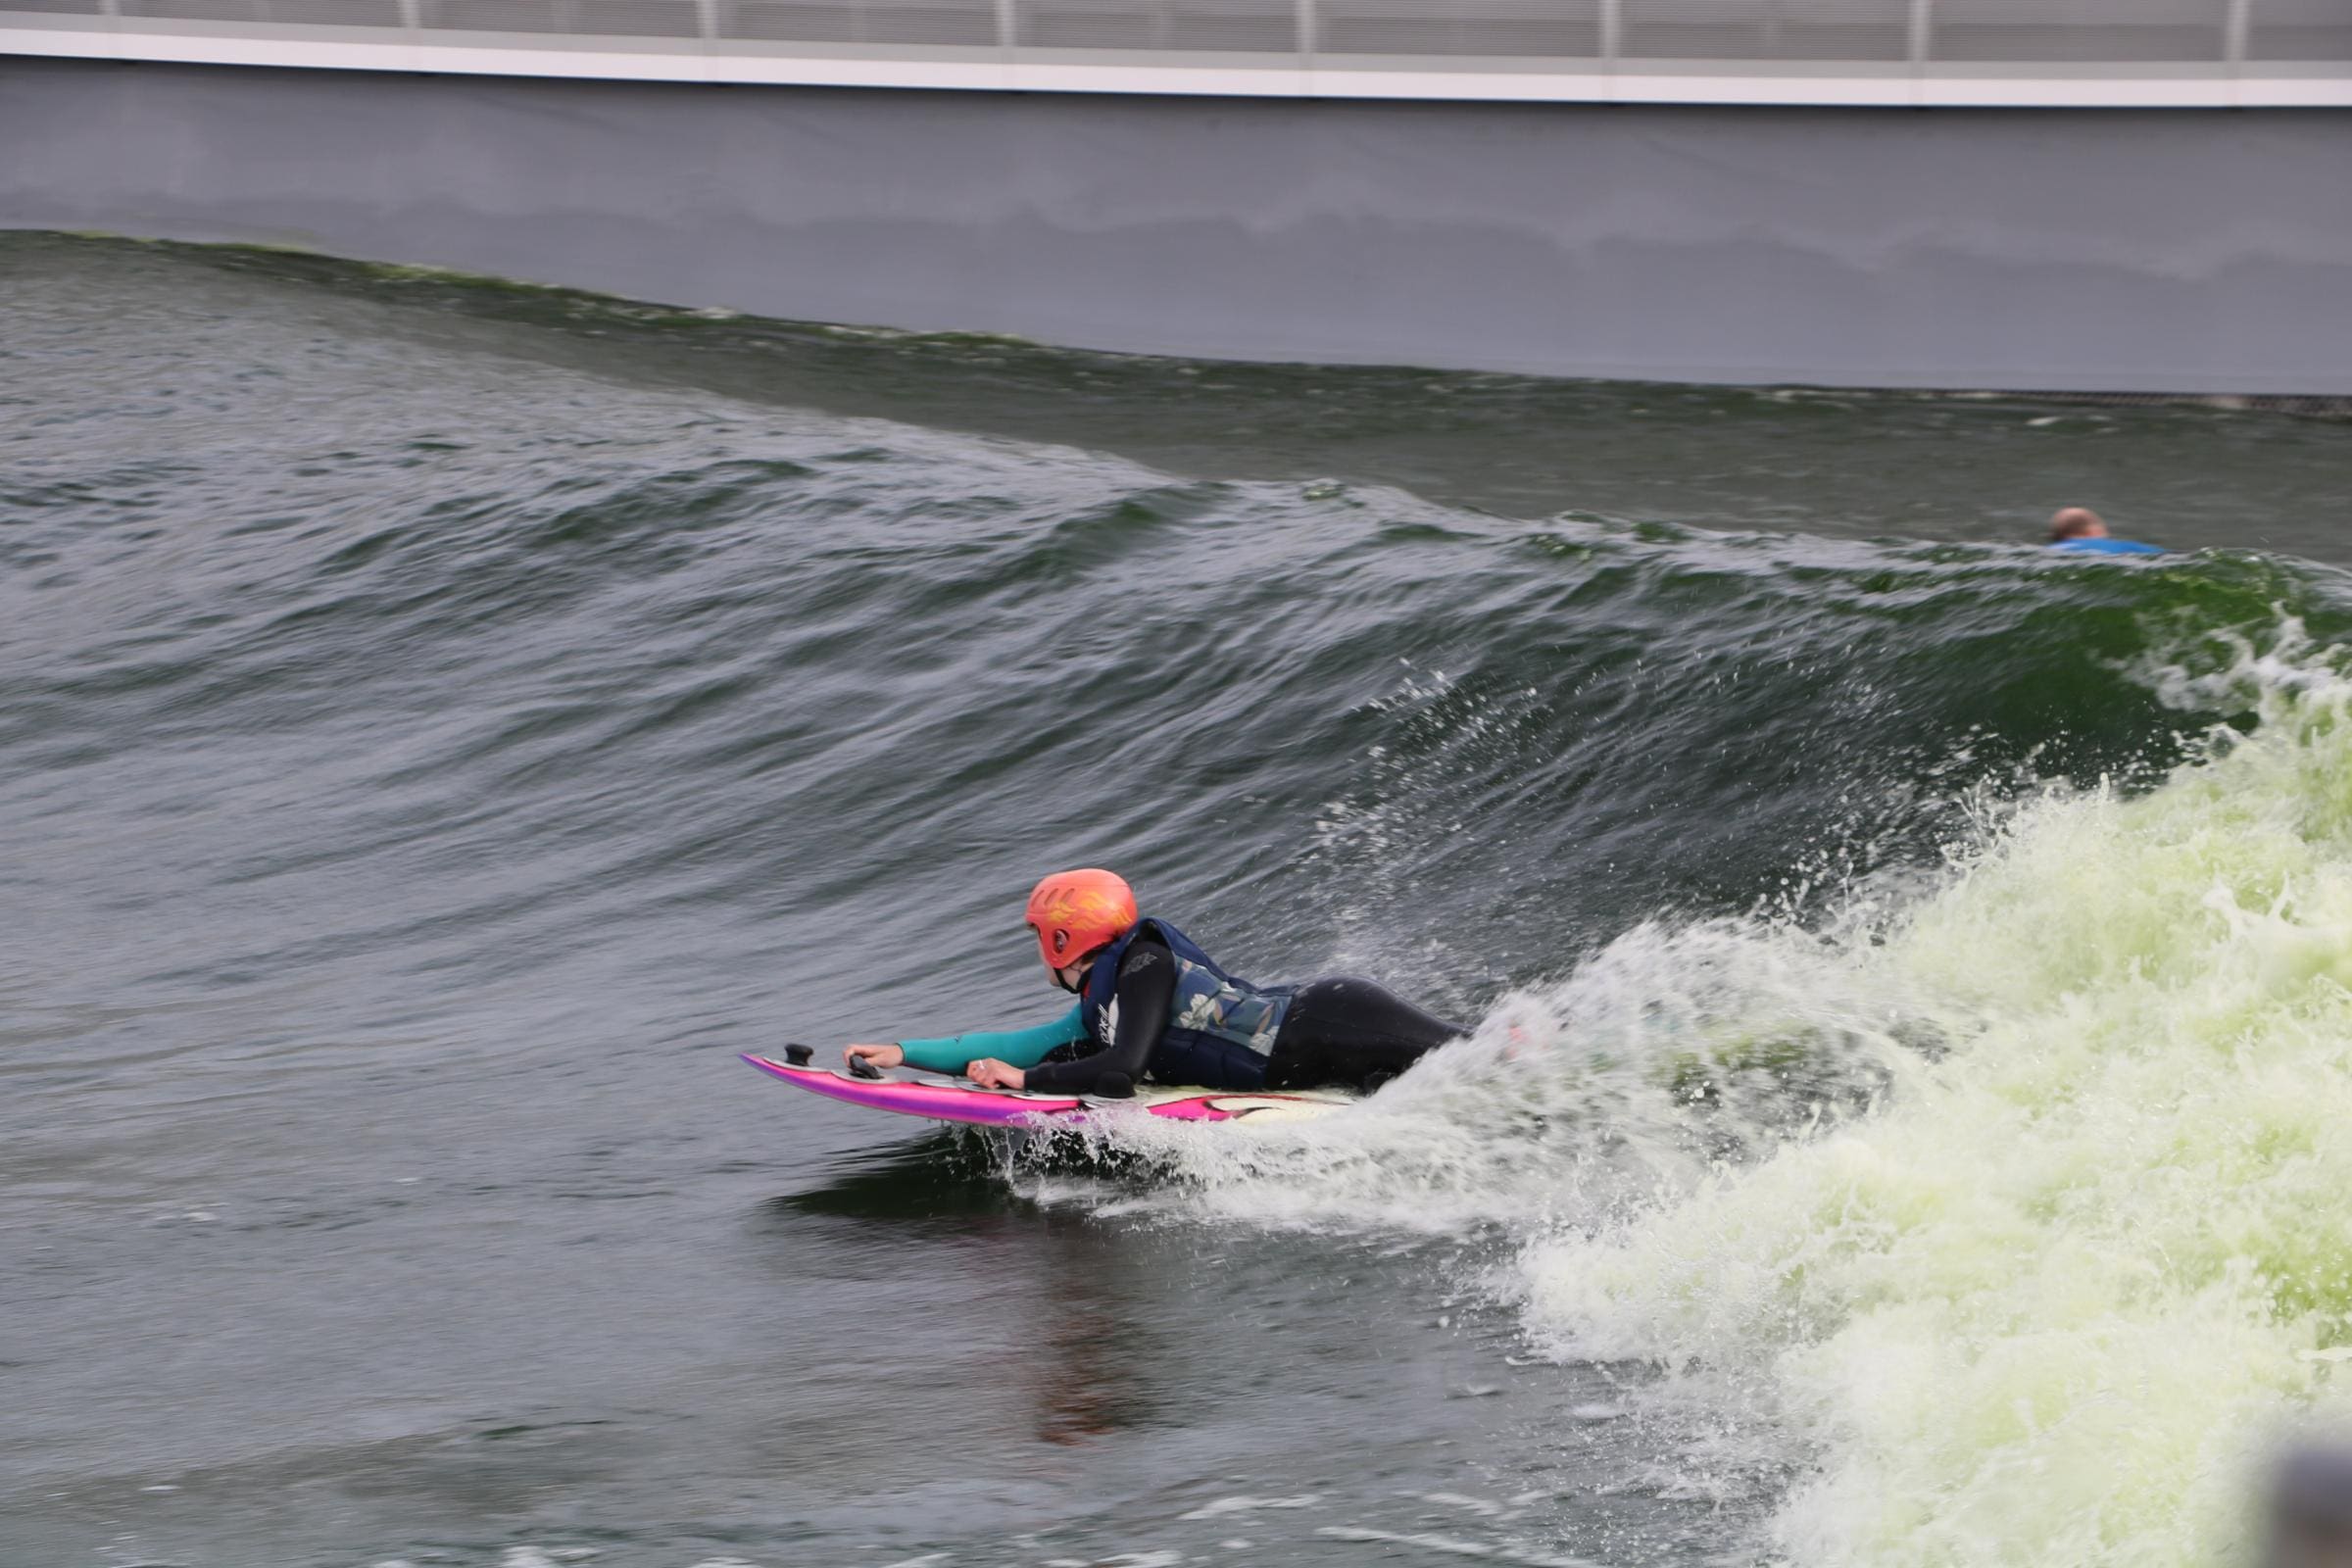 Adaptive Surfing 101: All You Need To Know